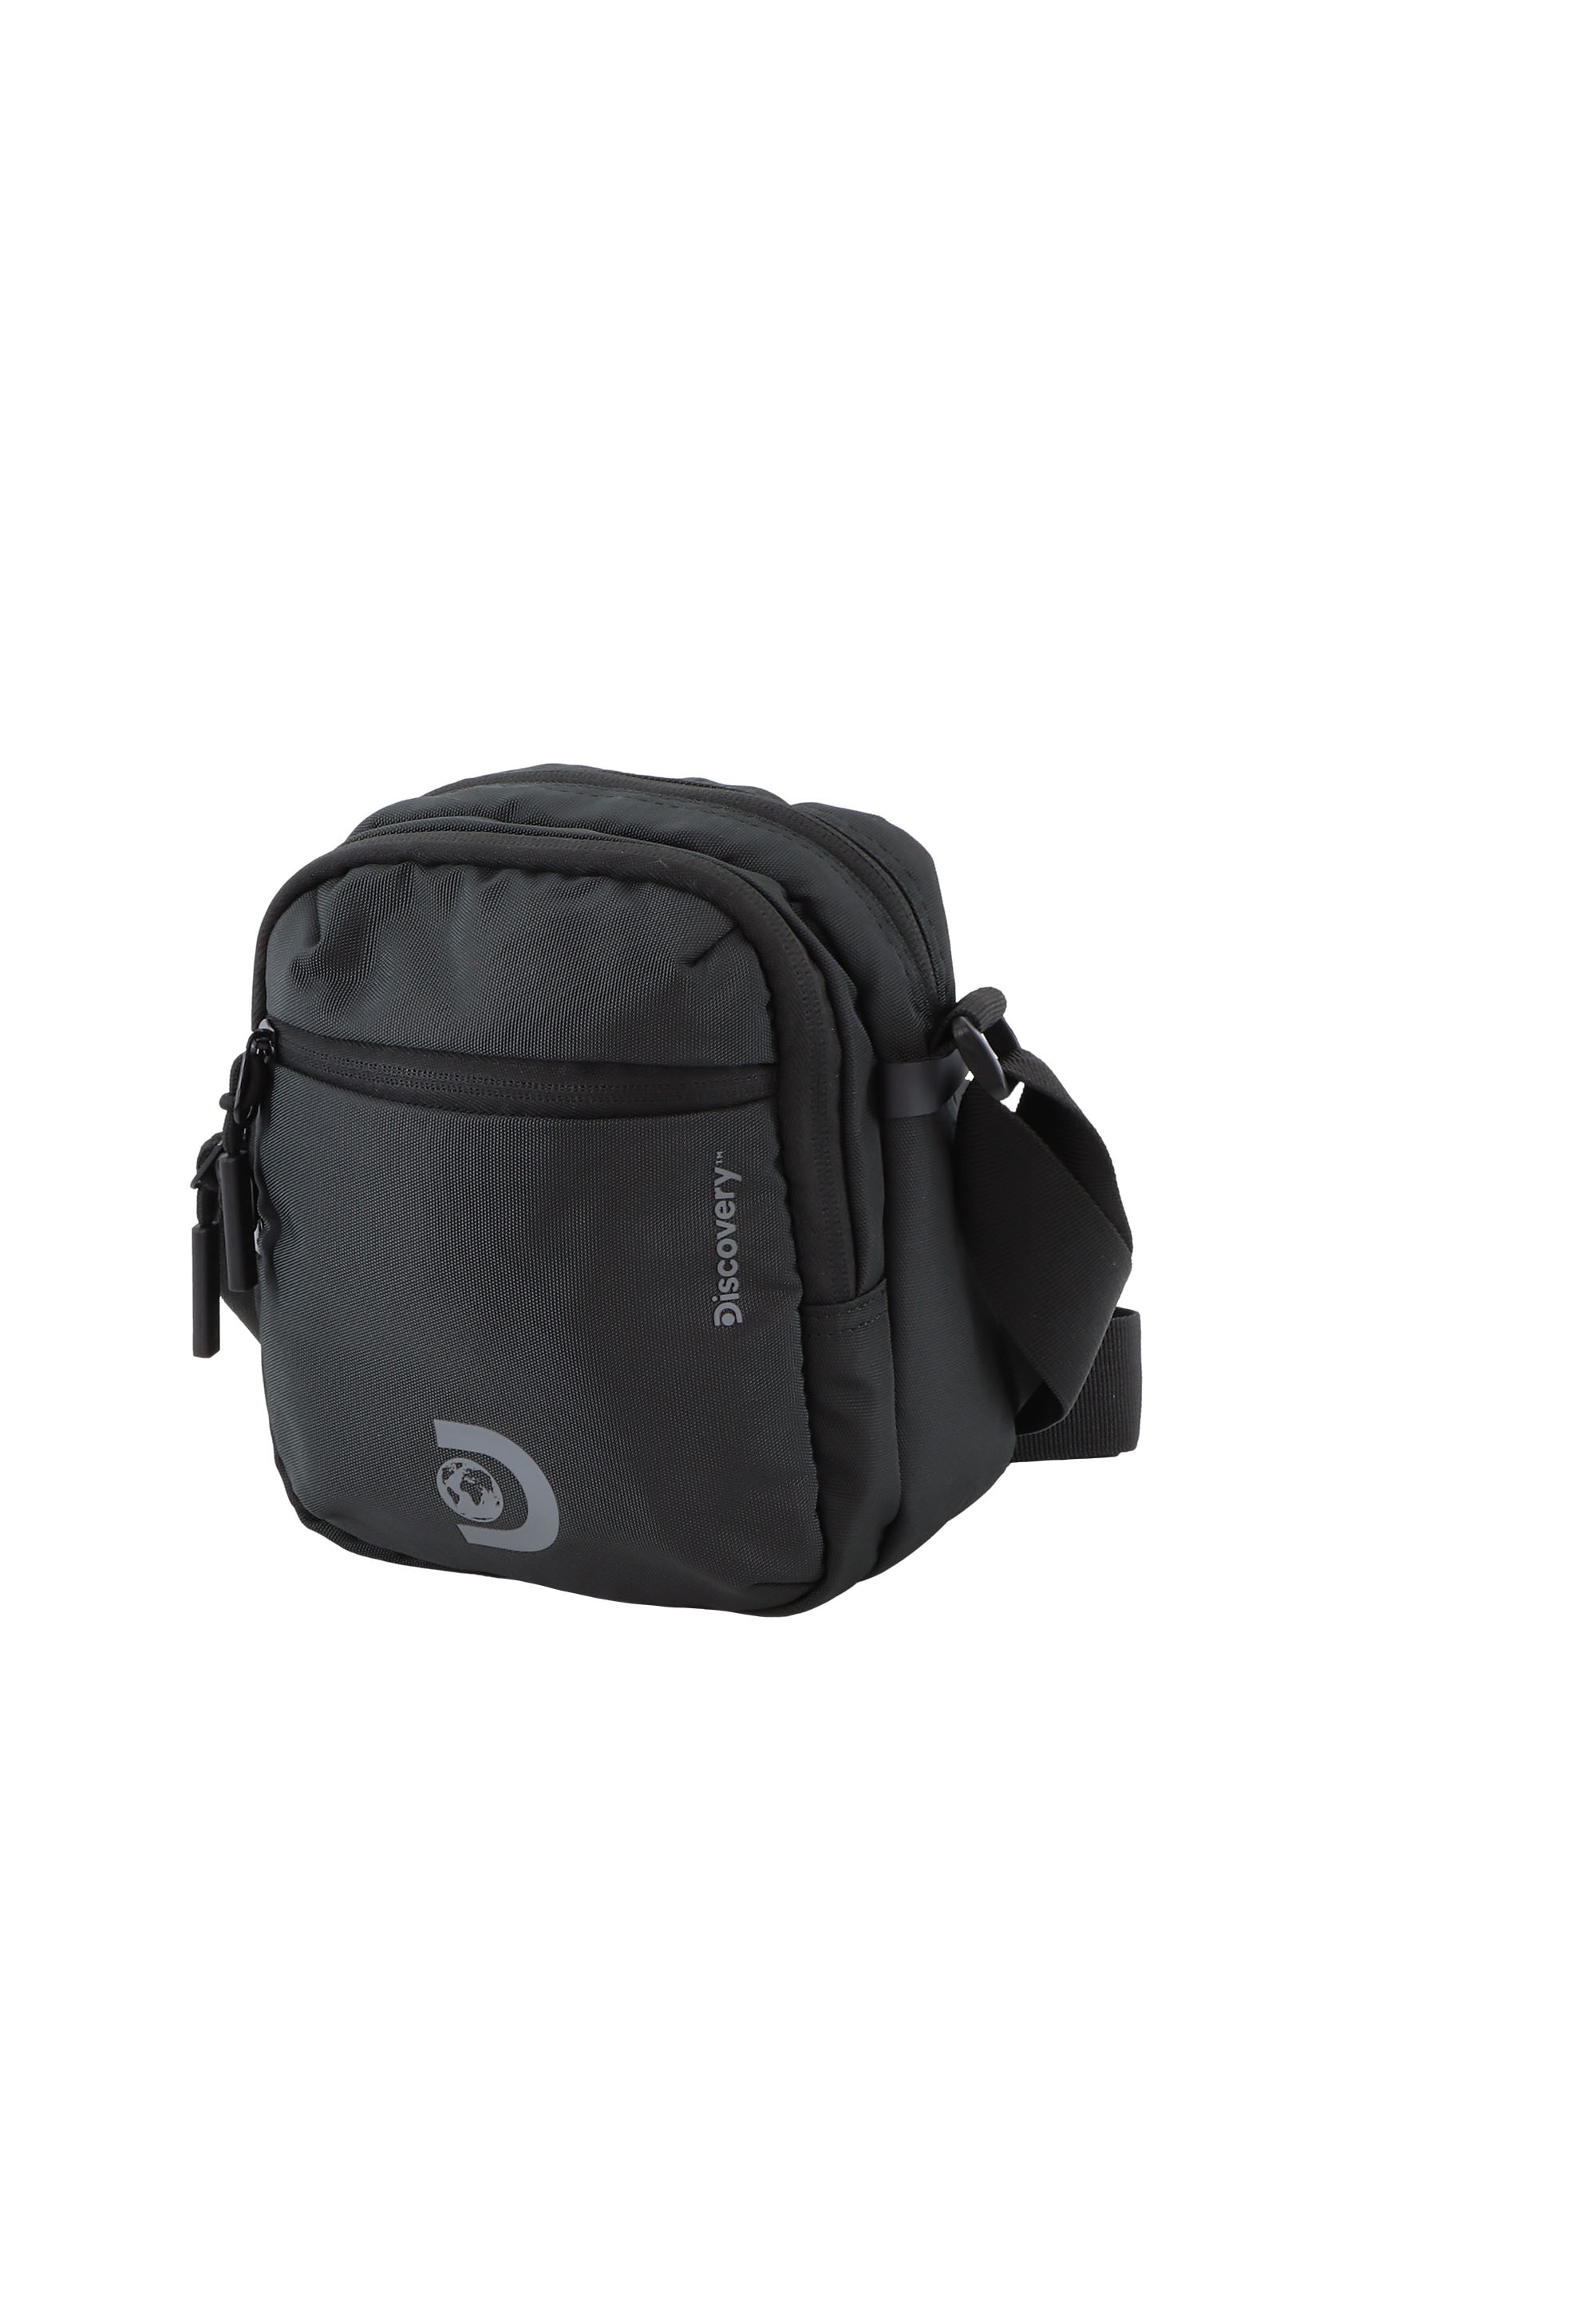 Discovery Schultertasche »Metropolis«, aus recyceltem Polyester